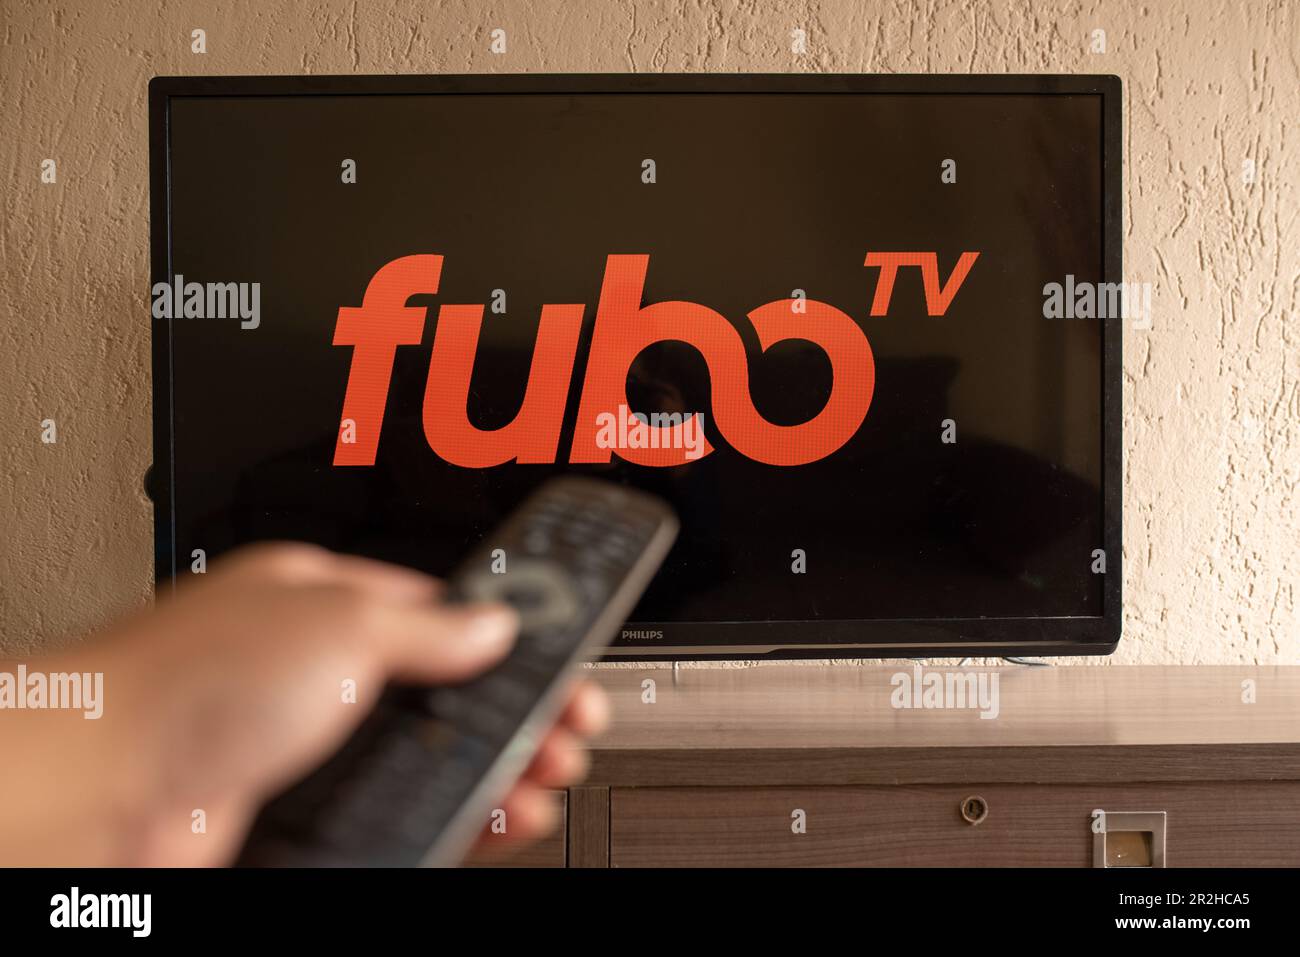 FuboTV Channels Price, Plans, And Add-on Costs